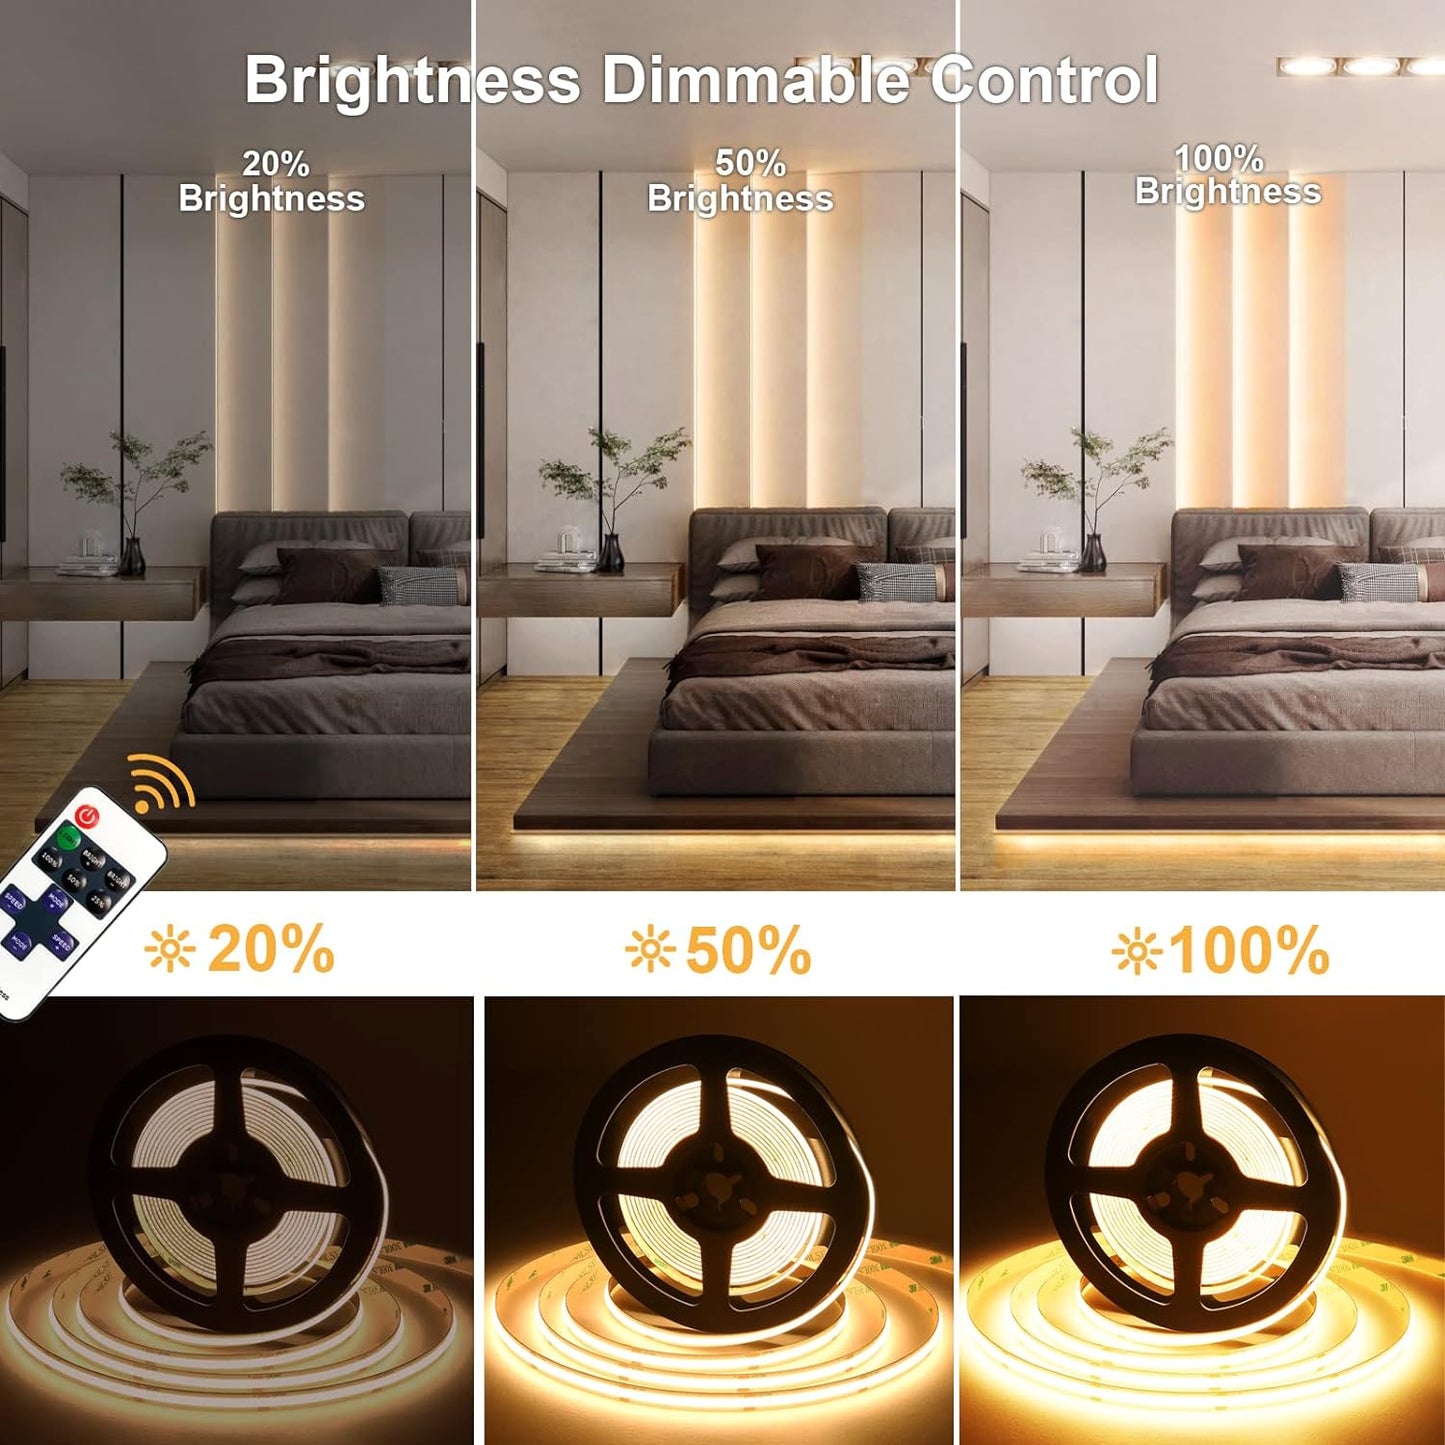 Hicolead COB LED Strip Kits 3M, Dimmable LED Strips with Power Supply and Remote Controller for Room Decoration